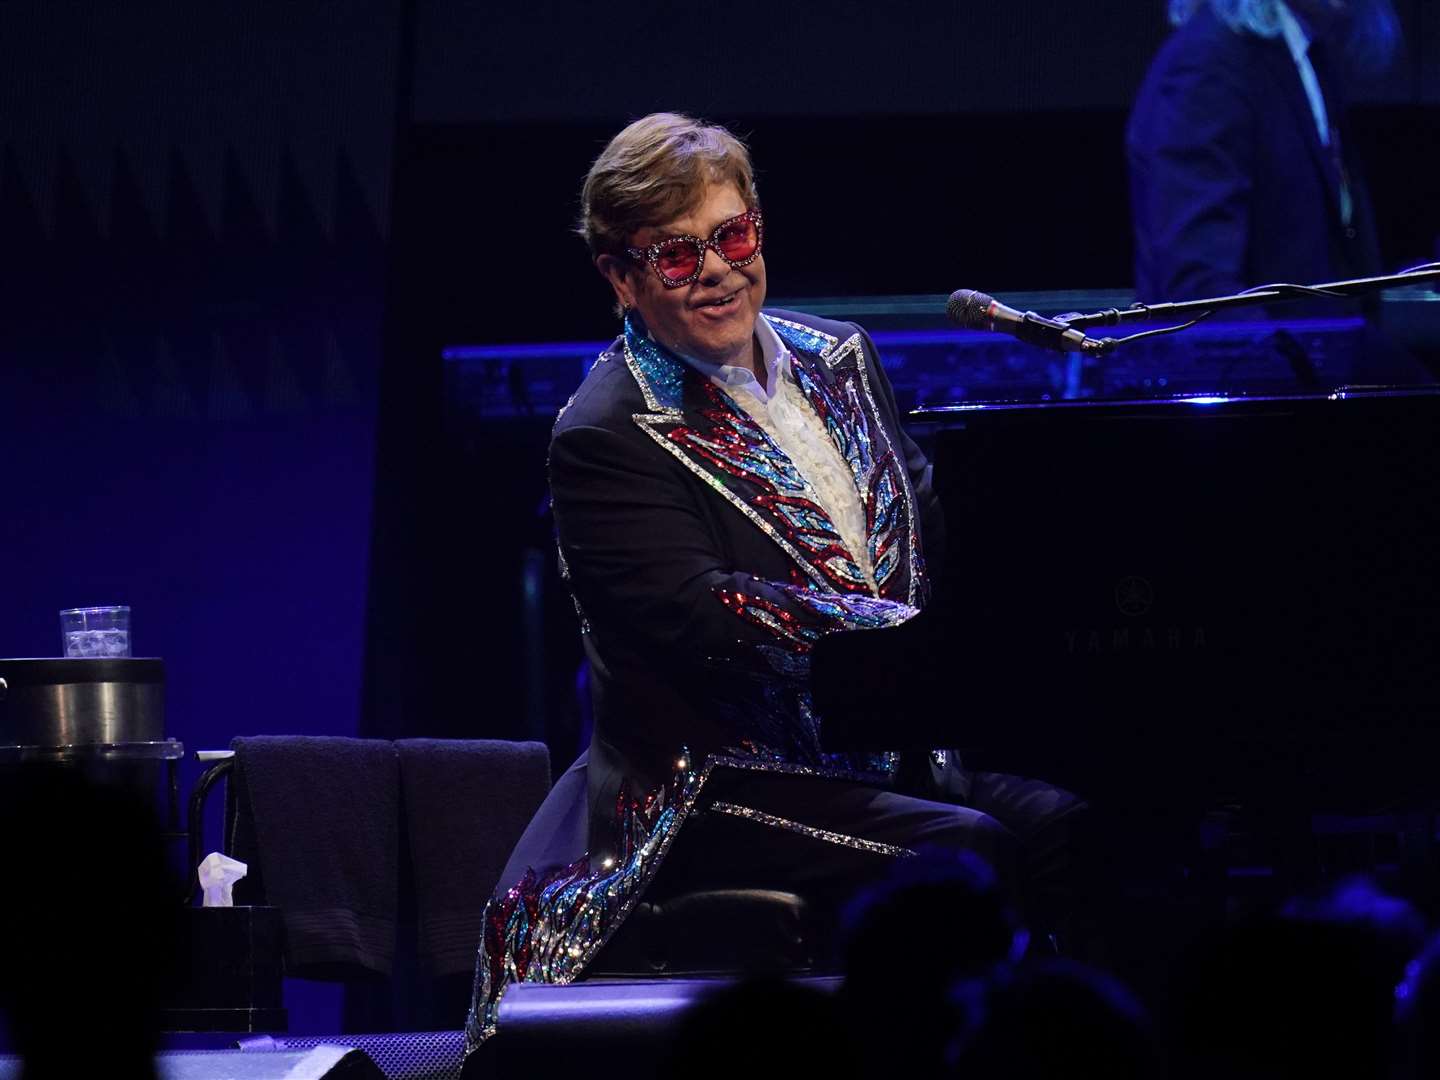 Elton John performing on stage during his Farewell Yellow Brick Road show at the Tele2 Arena in Stockholm, Sweden (Yui Mok/PA)